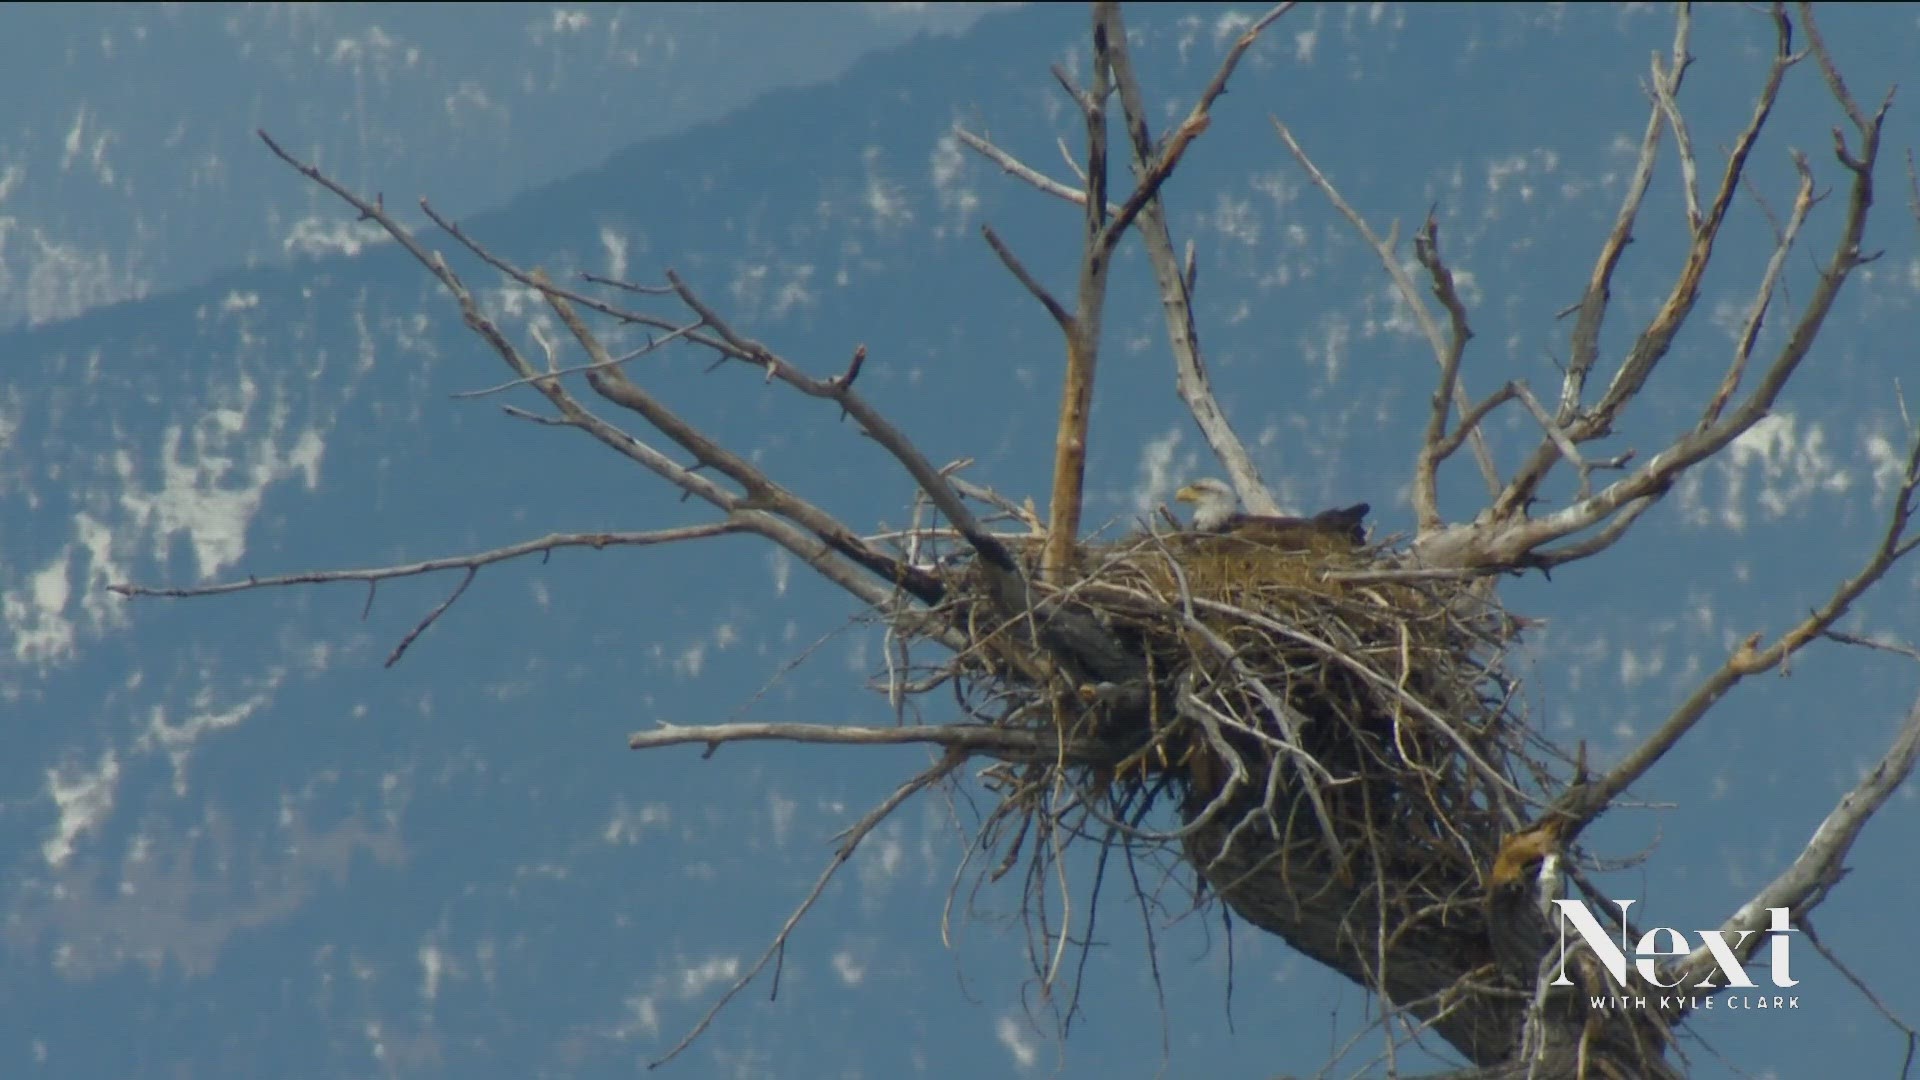 More than 300 bald eagles are now nesting in Colorado, according to Colorado Parks and Wildlife.